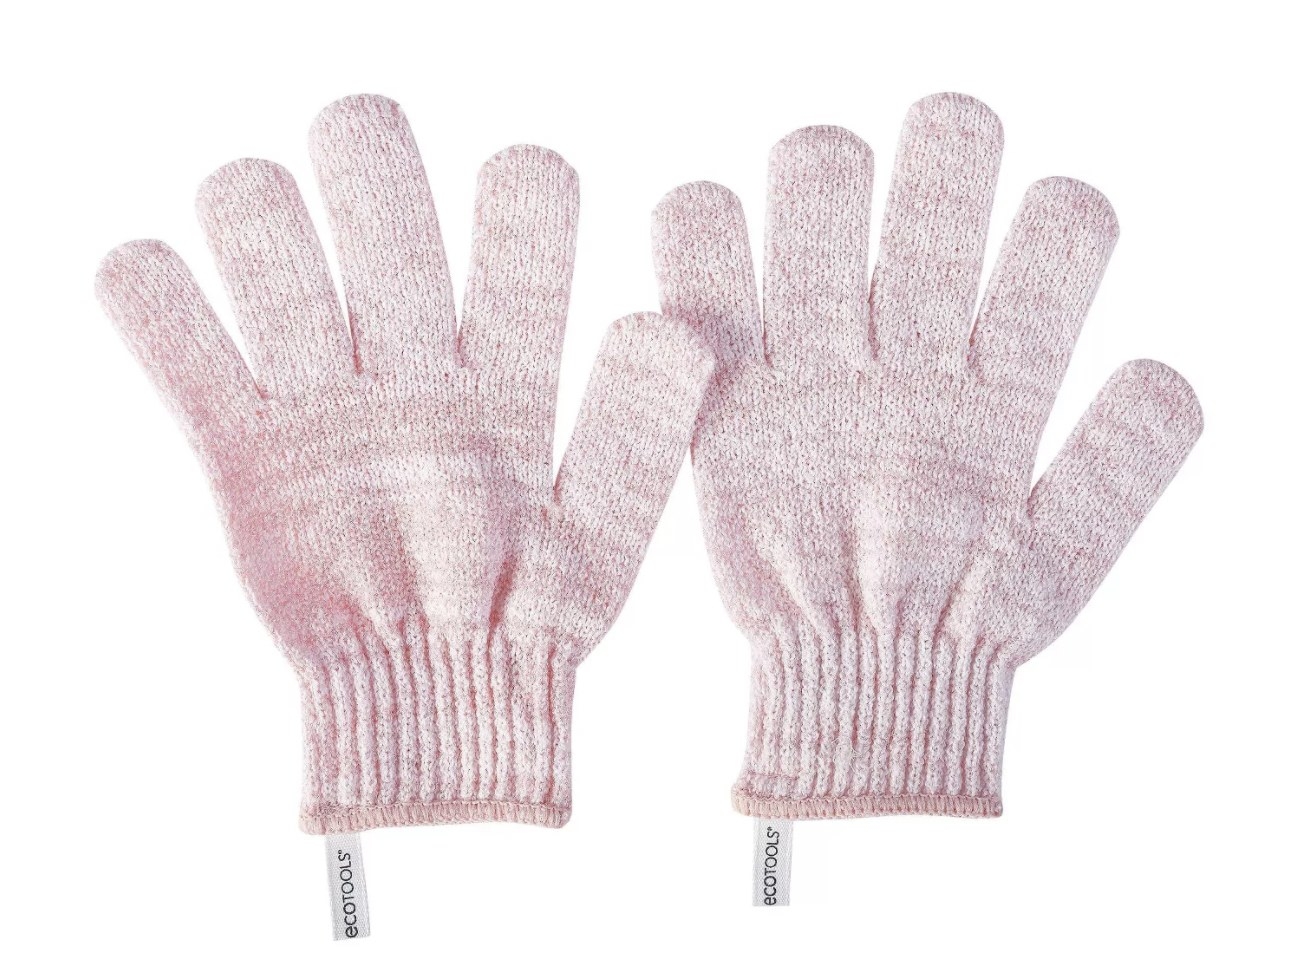 the gloves in pink